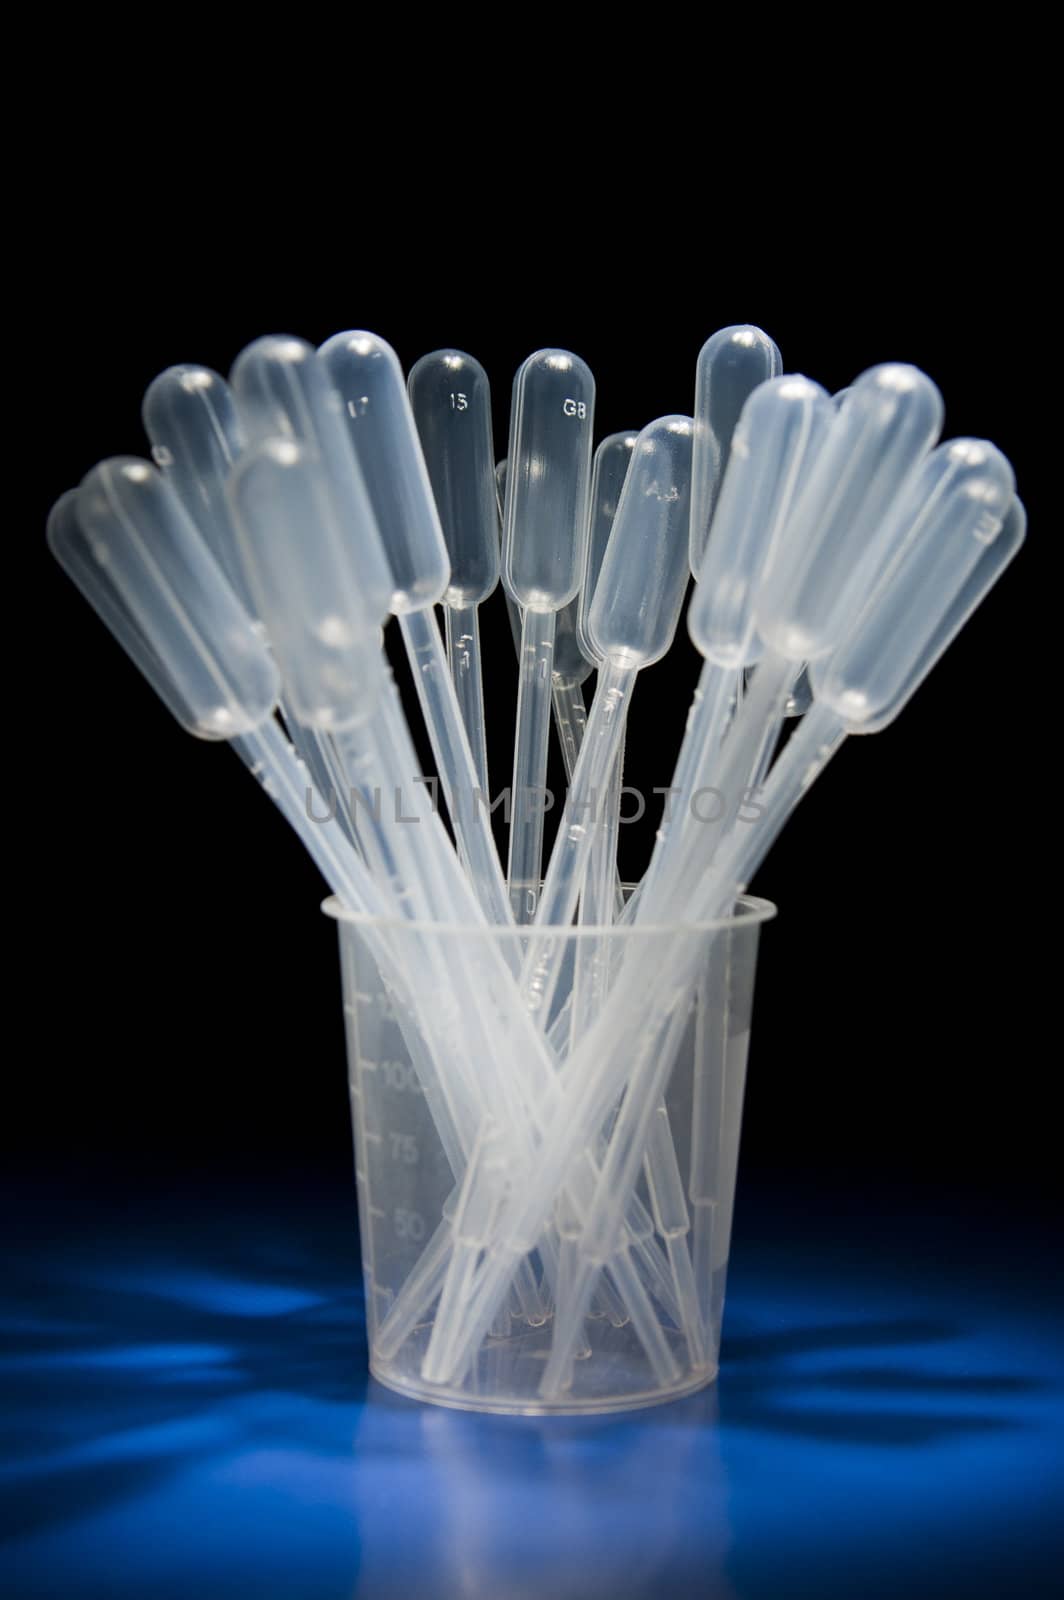 Zoomed pack of pipettes standing in measure glass